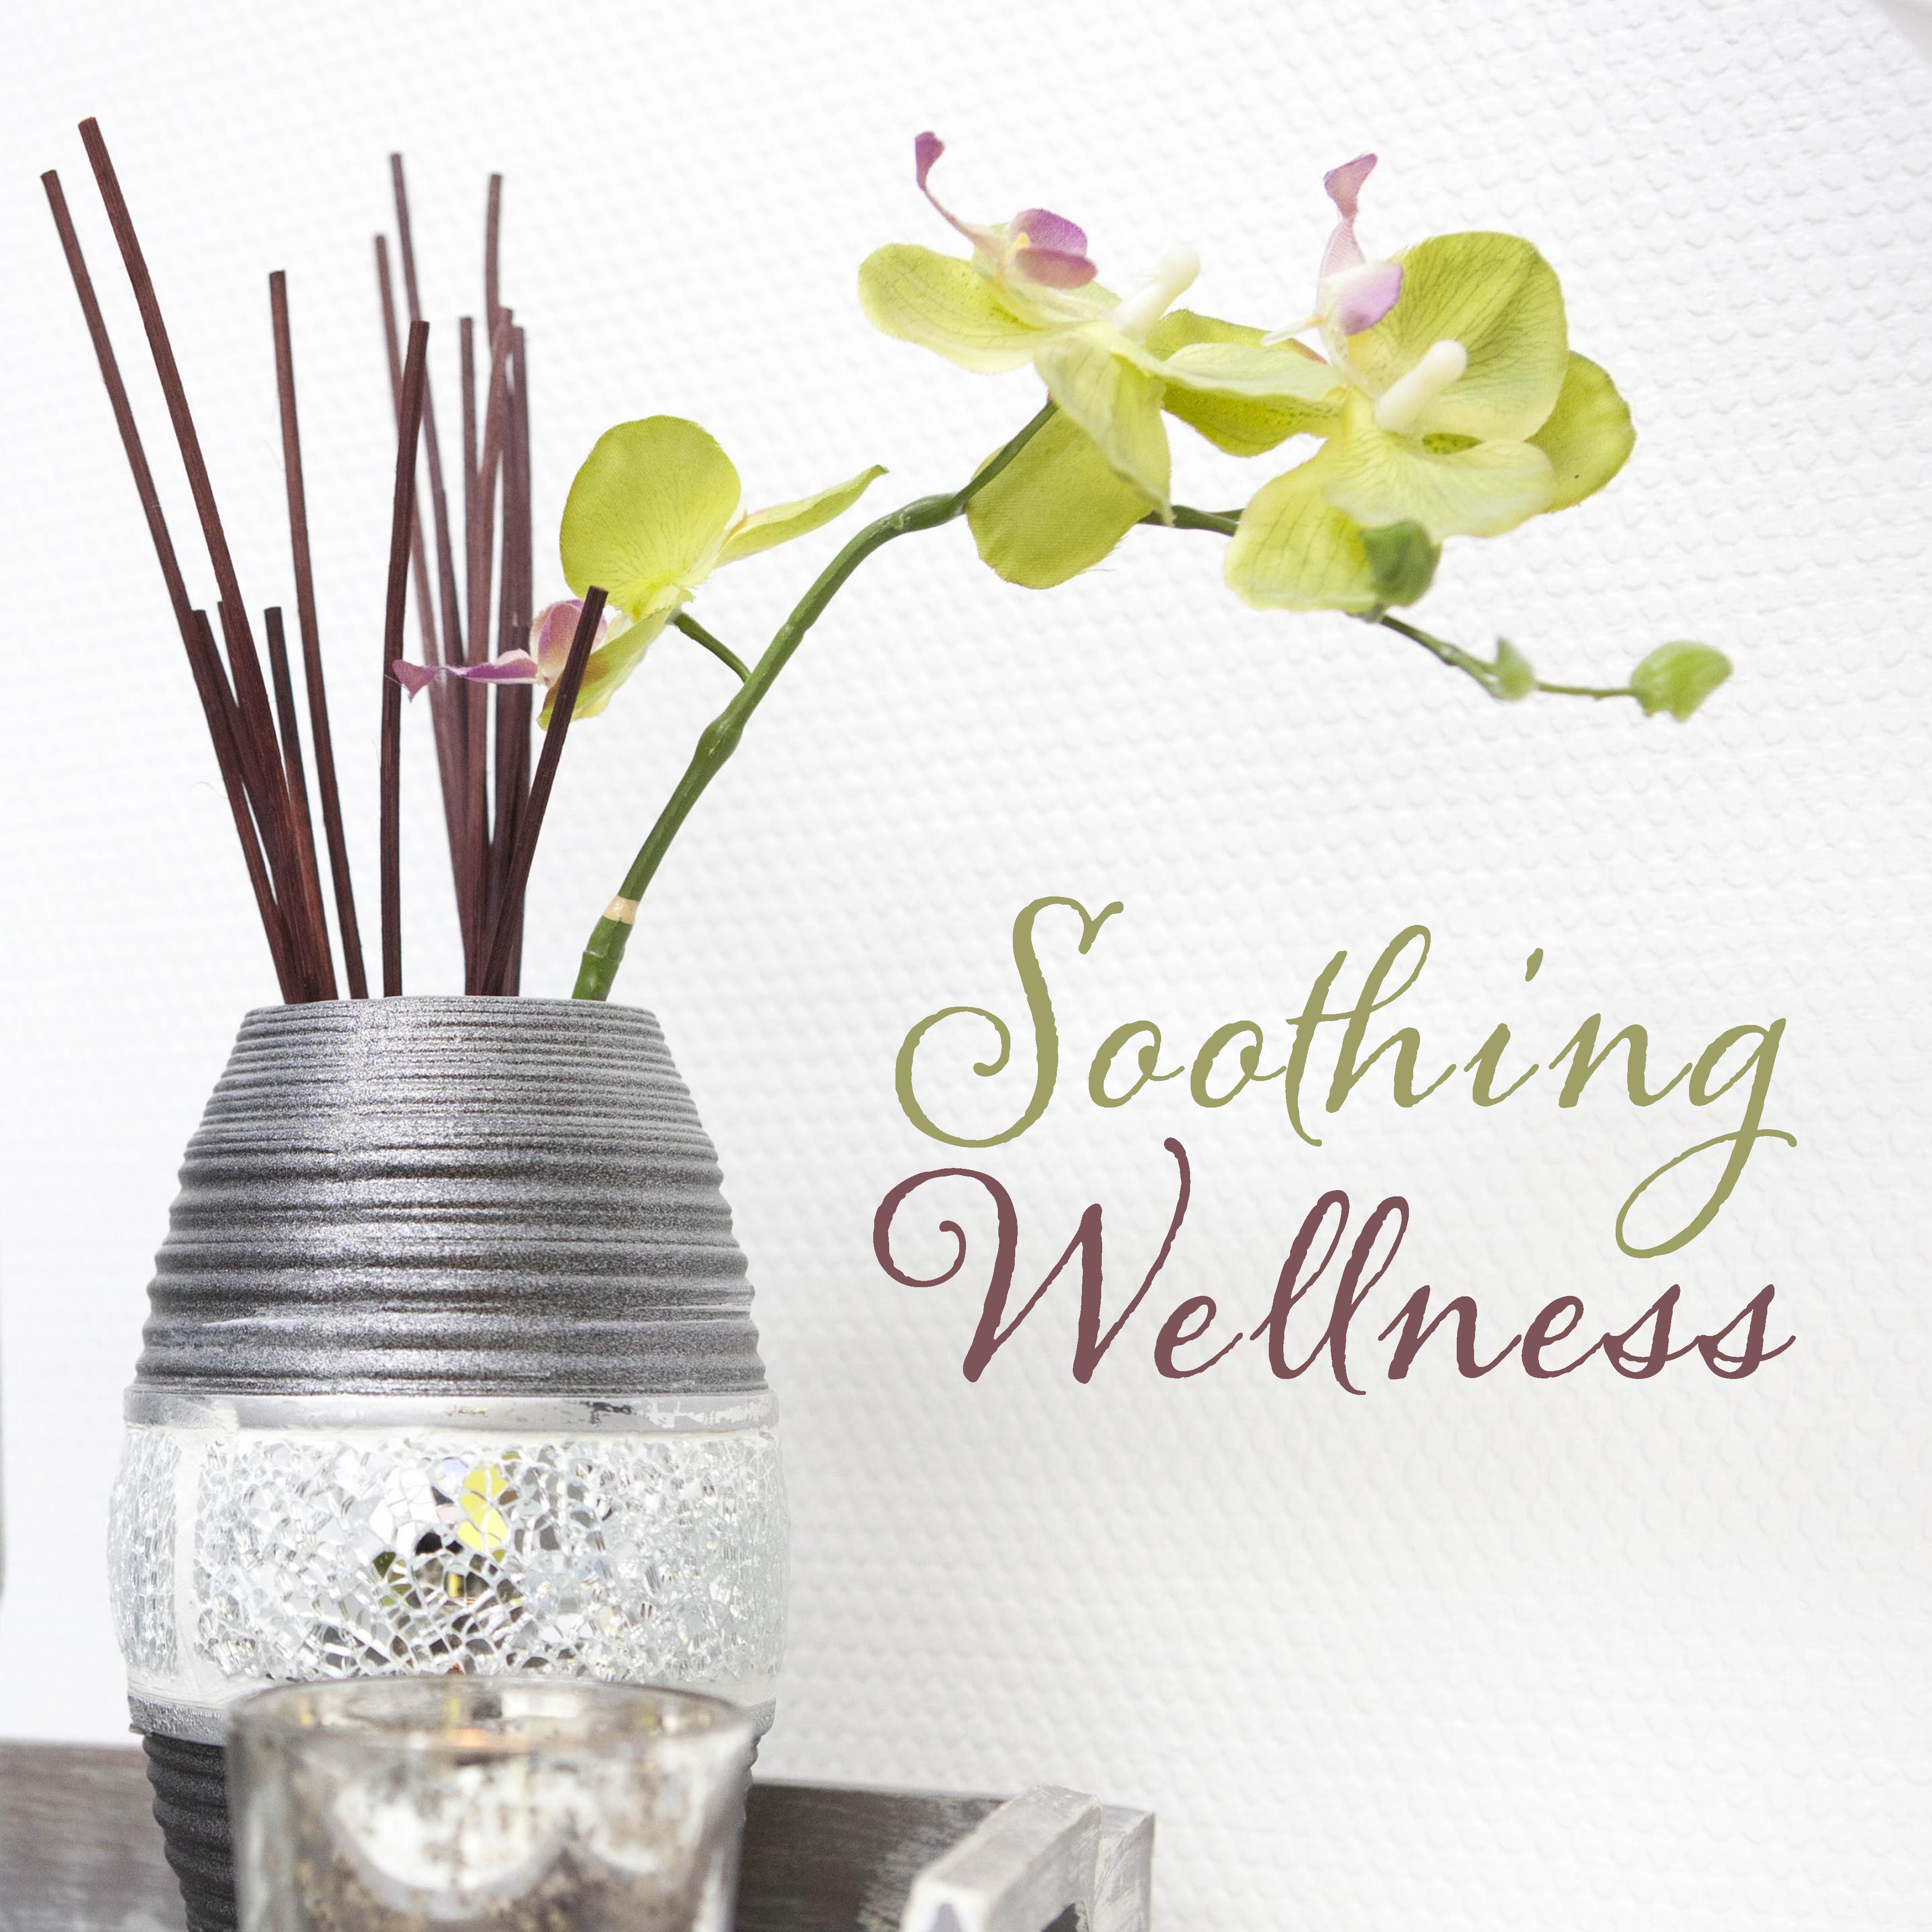 Soothing Wellness – Serenity Zen Spa, Massage Music, Stress Relief, Therapy for Body, Calming Nature Sounds